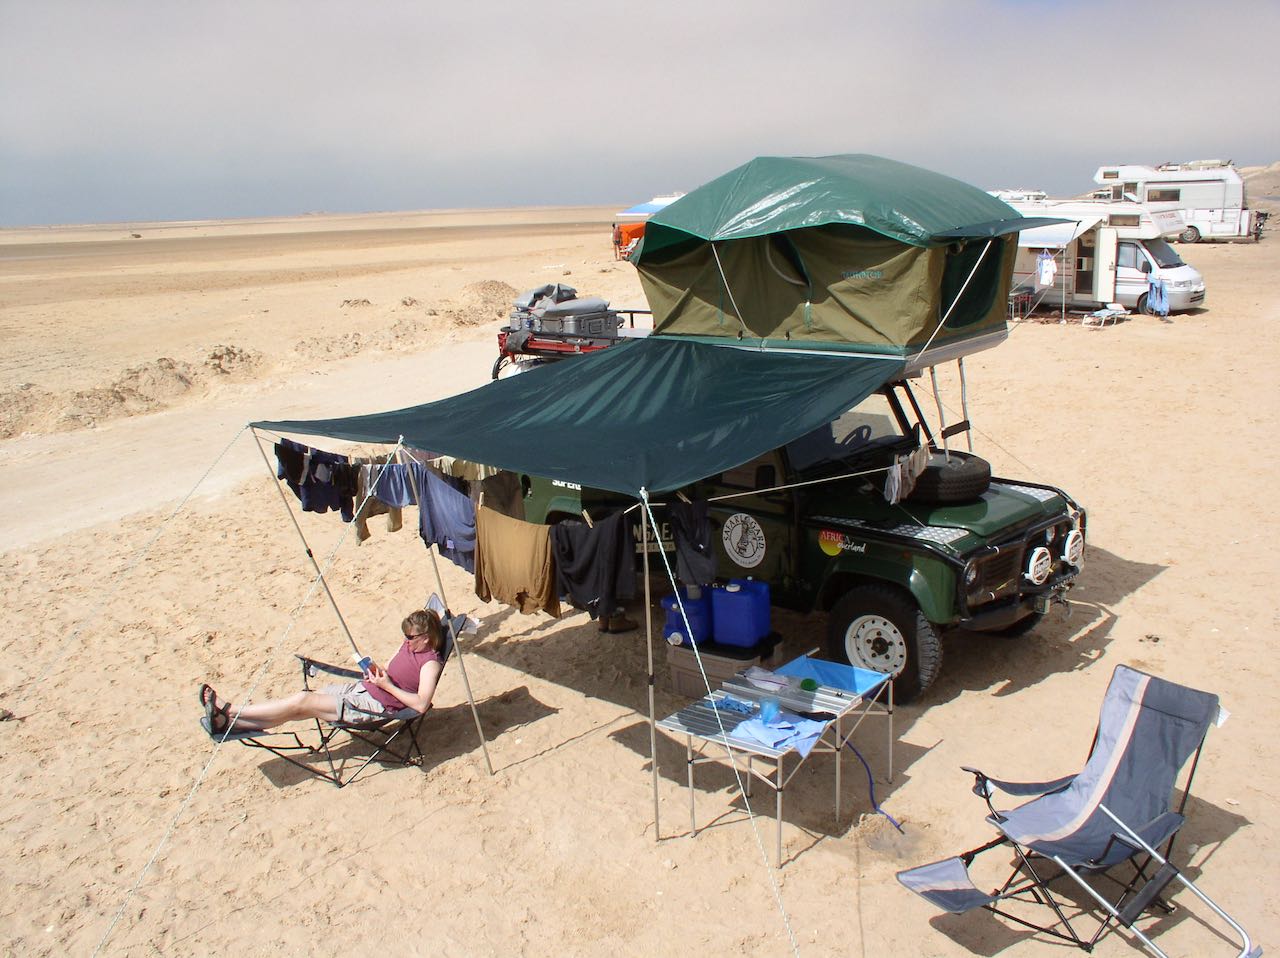 Relaxing in Western Sahara. This photo gives you an idea of the kind of gear that we had with us on our Africa trip. As much as we liked having shade, that awning was so difficult to set up that we hardly ever used it.